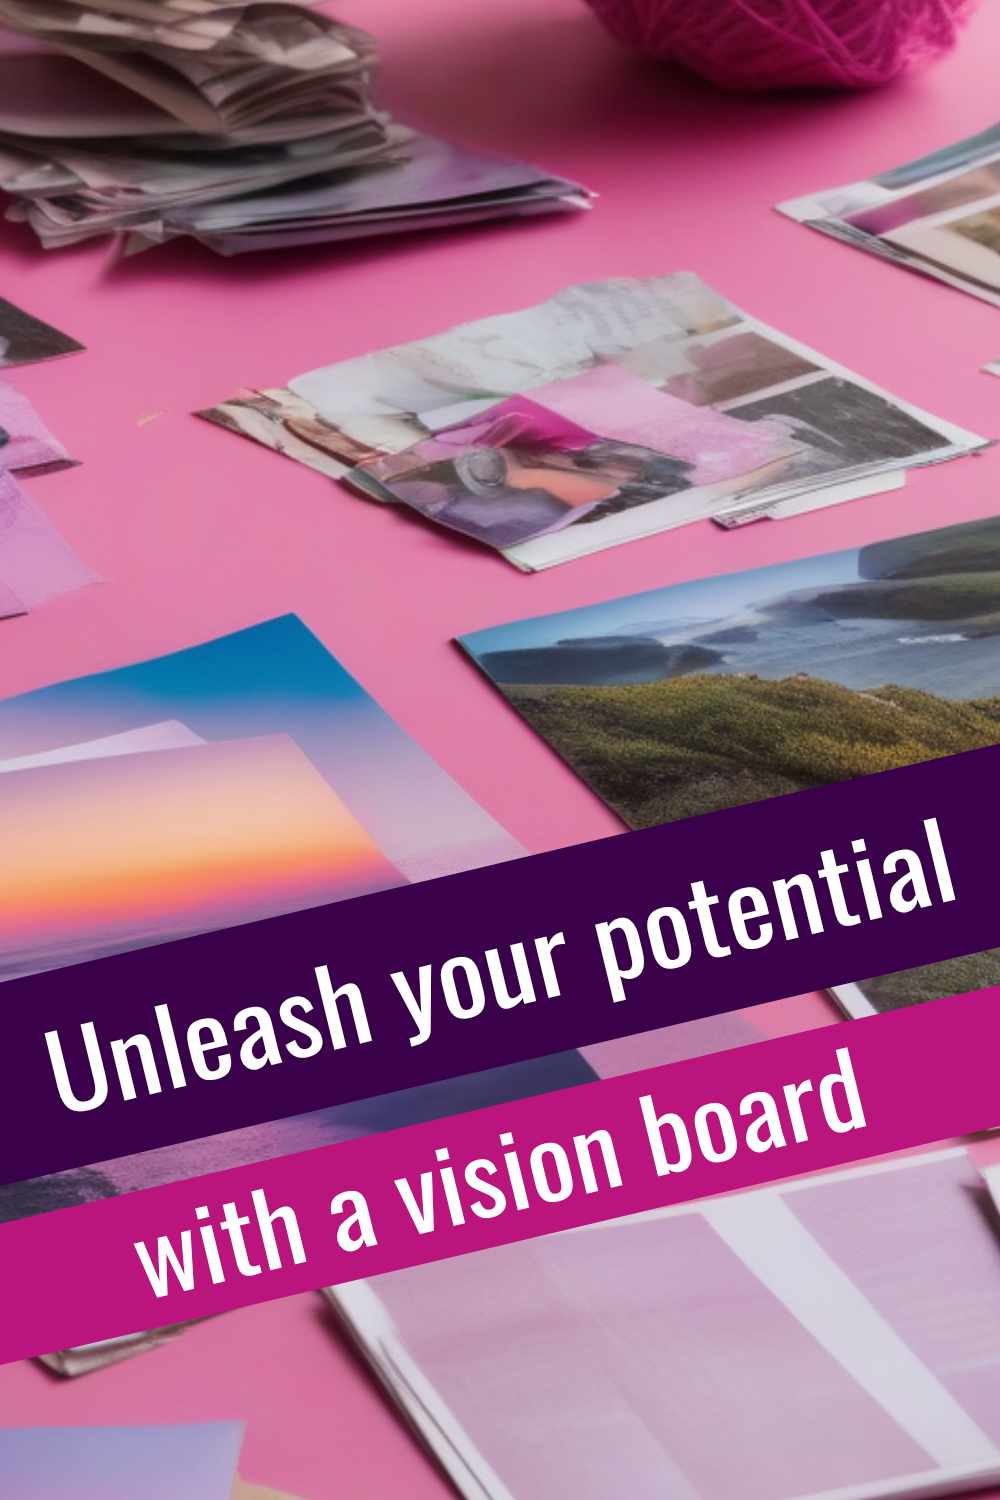 Unleash your potential through the power of a vision board.